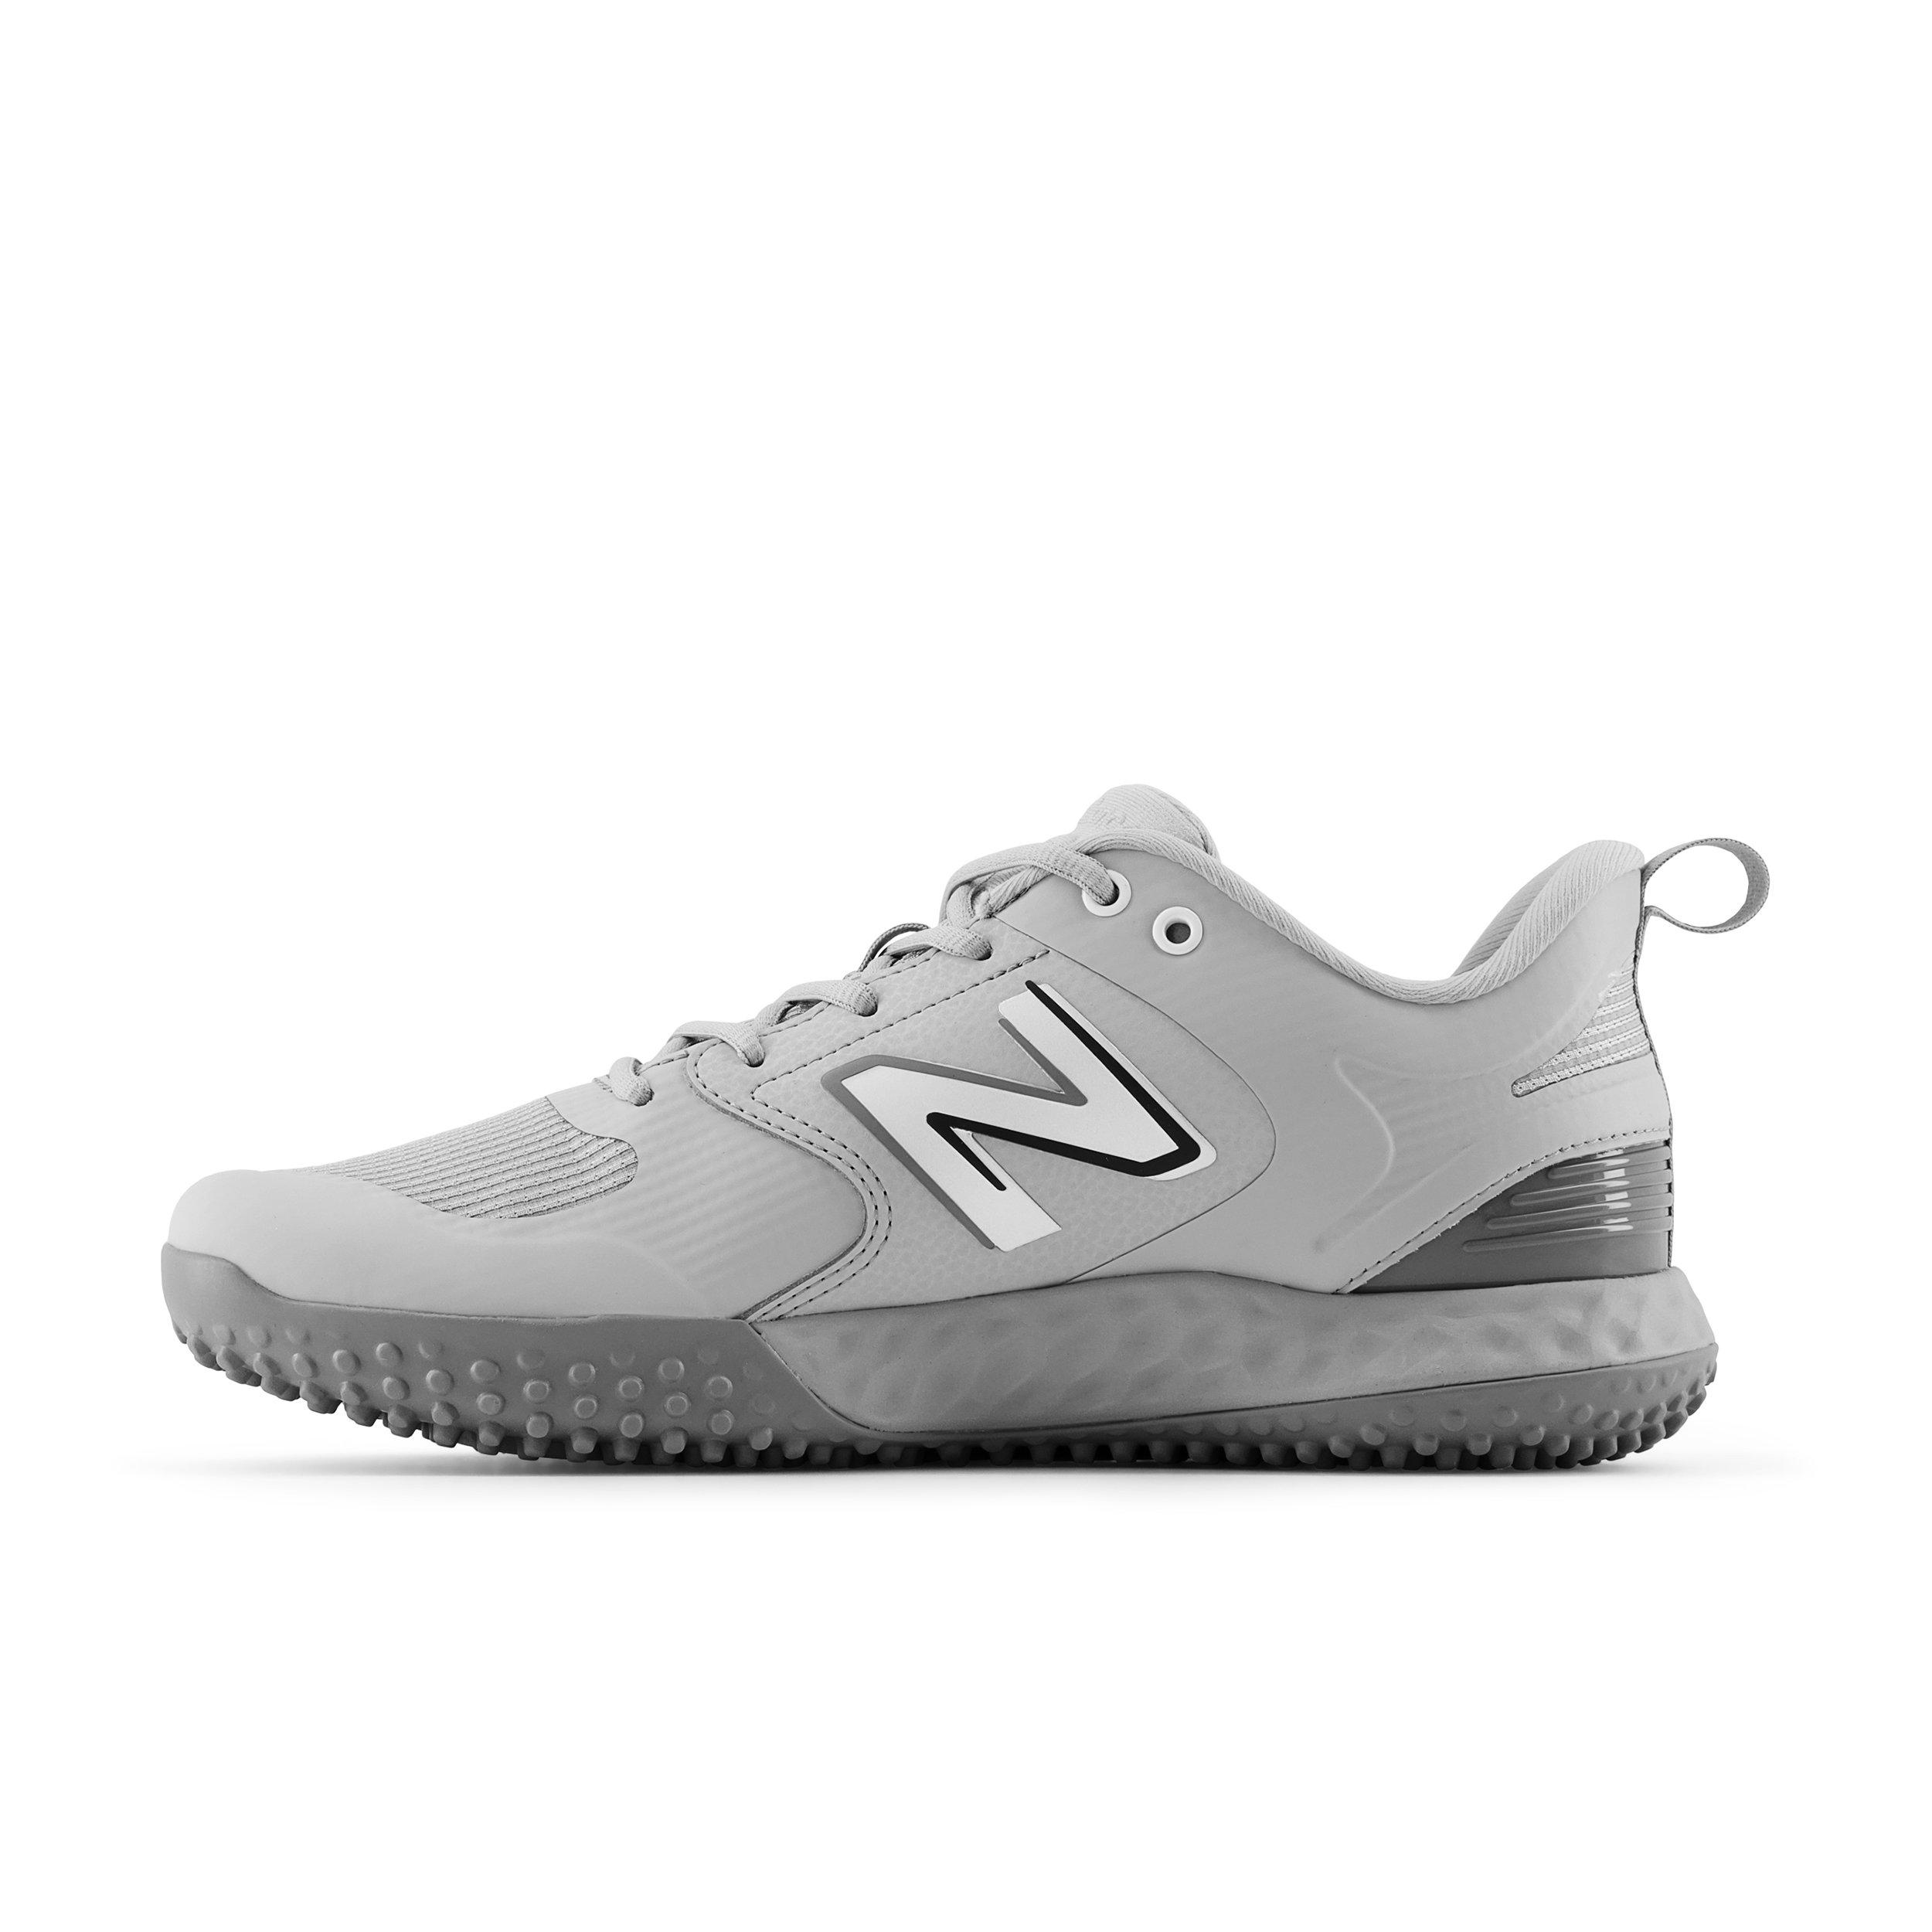 Smash It Sports - New Balance Footwear - Now Available Shop Now -   Introducing the New Balance  Fresh Foam X 3000 V6 Metal, designed for supreme comfort and unrelenting  confidence. Made